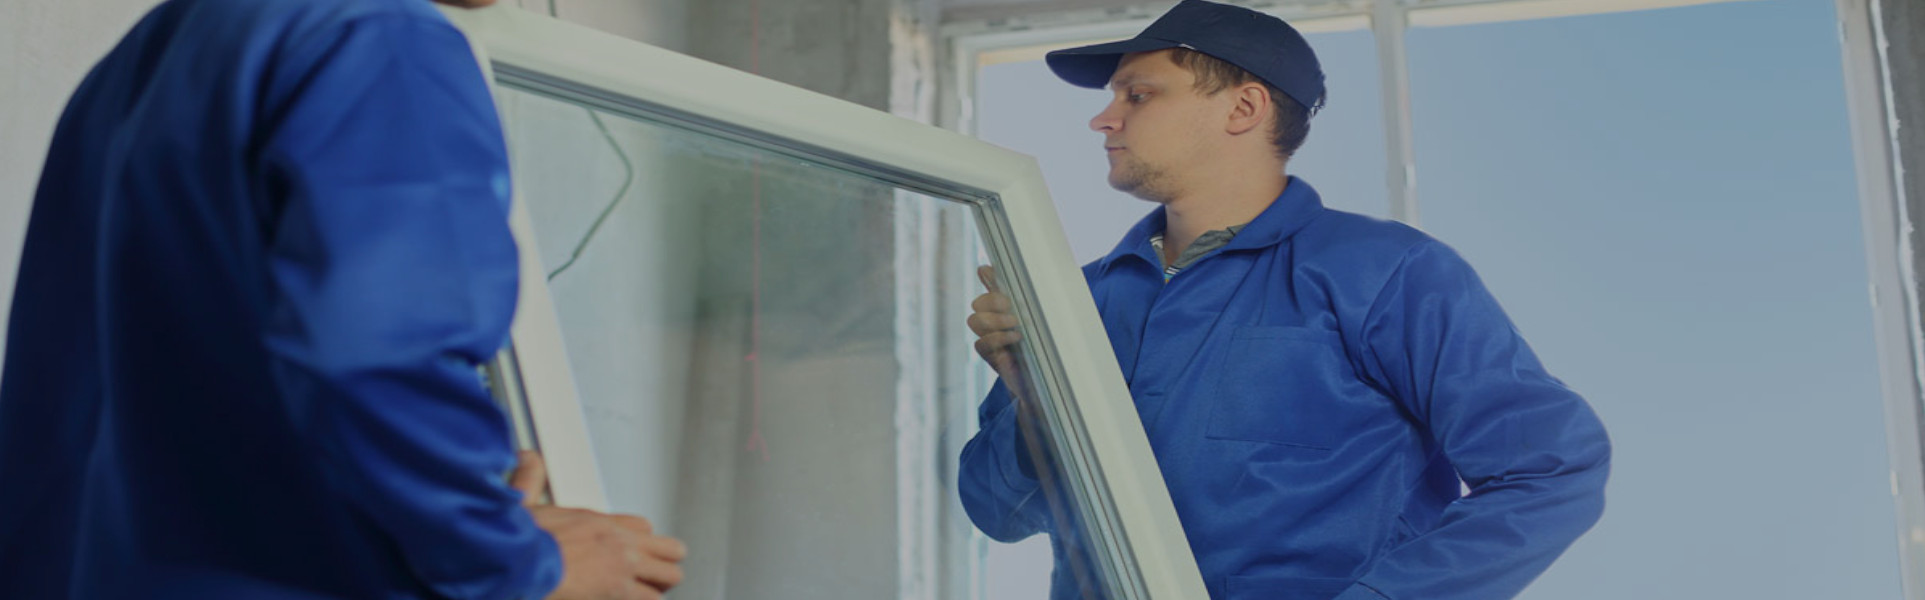 Slider, Double Glazing Installers in Finchley Central, N3